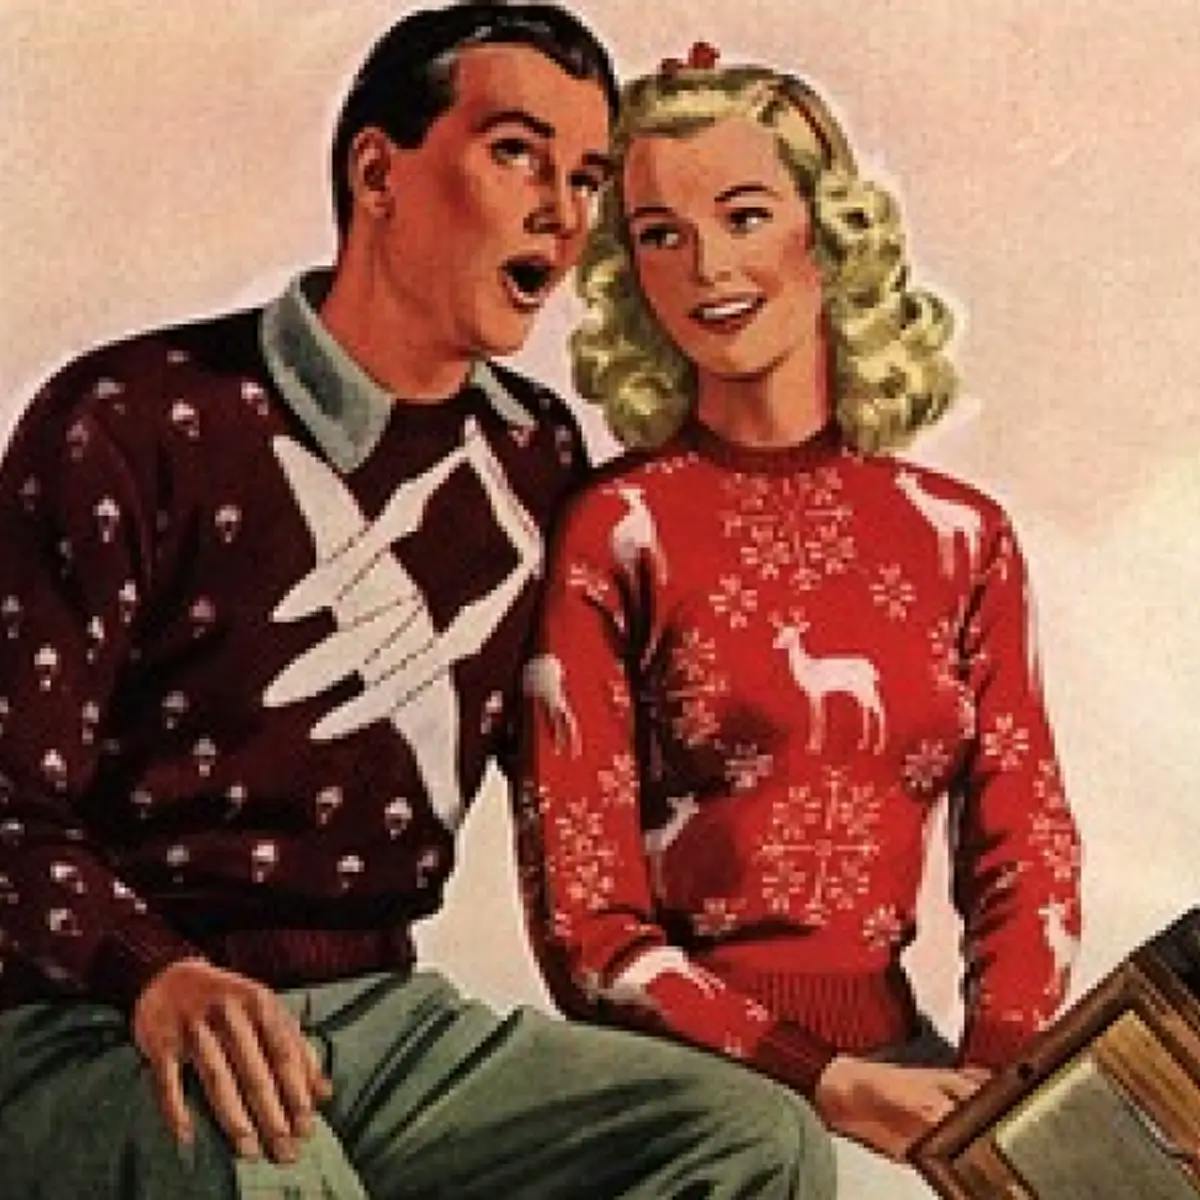 Man and woman in 1950s advertisement, wearing the first Christmas sweaters.